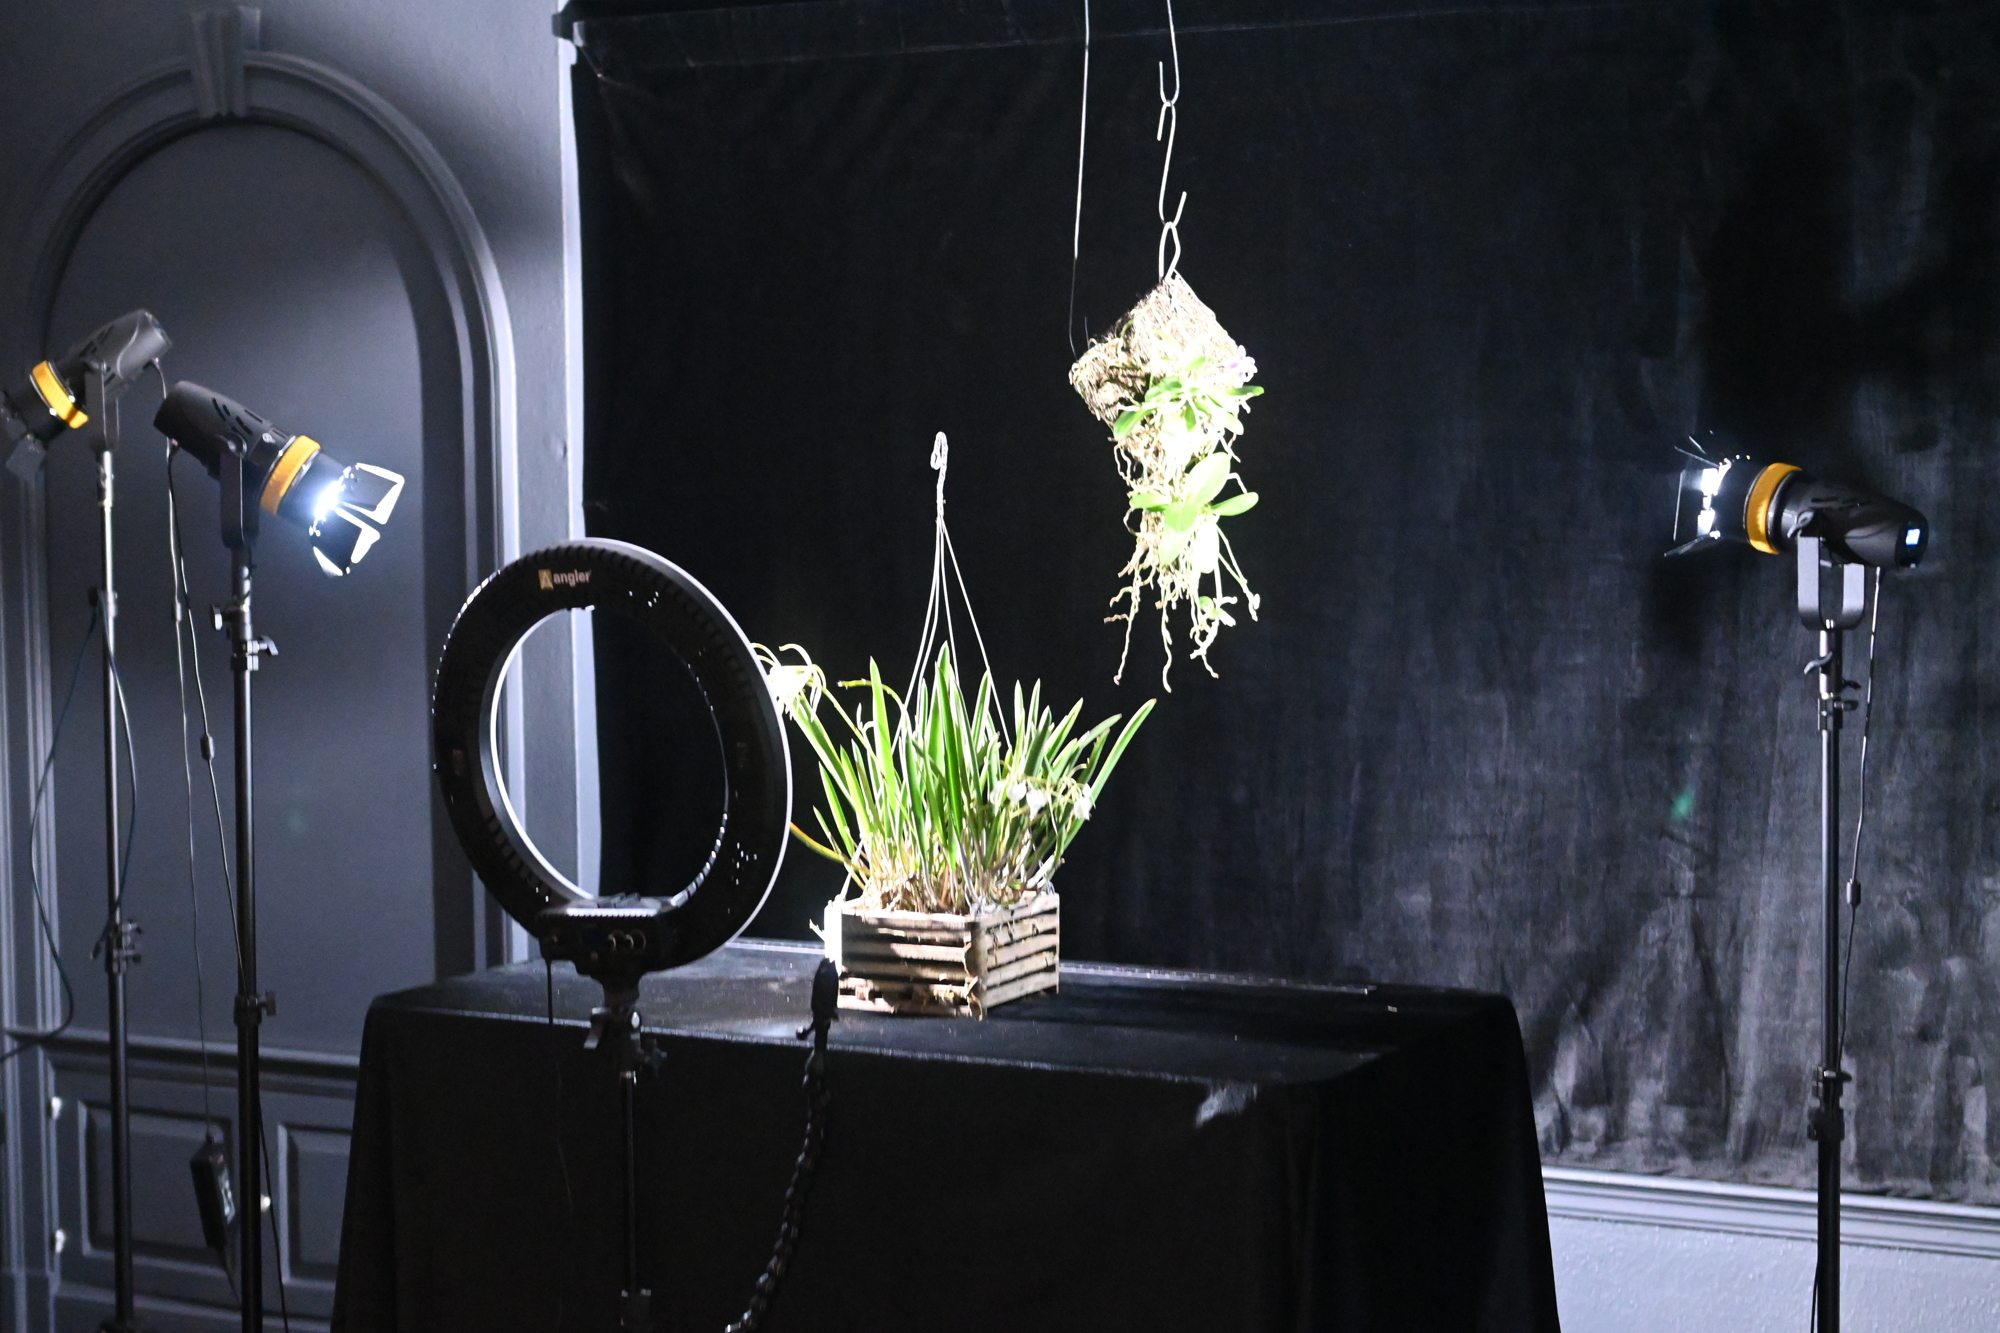 The indoor photo studio set up for the Selby Garden volunteers. (Photo by Spencer Fordin)